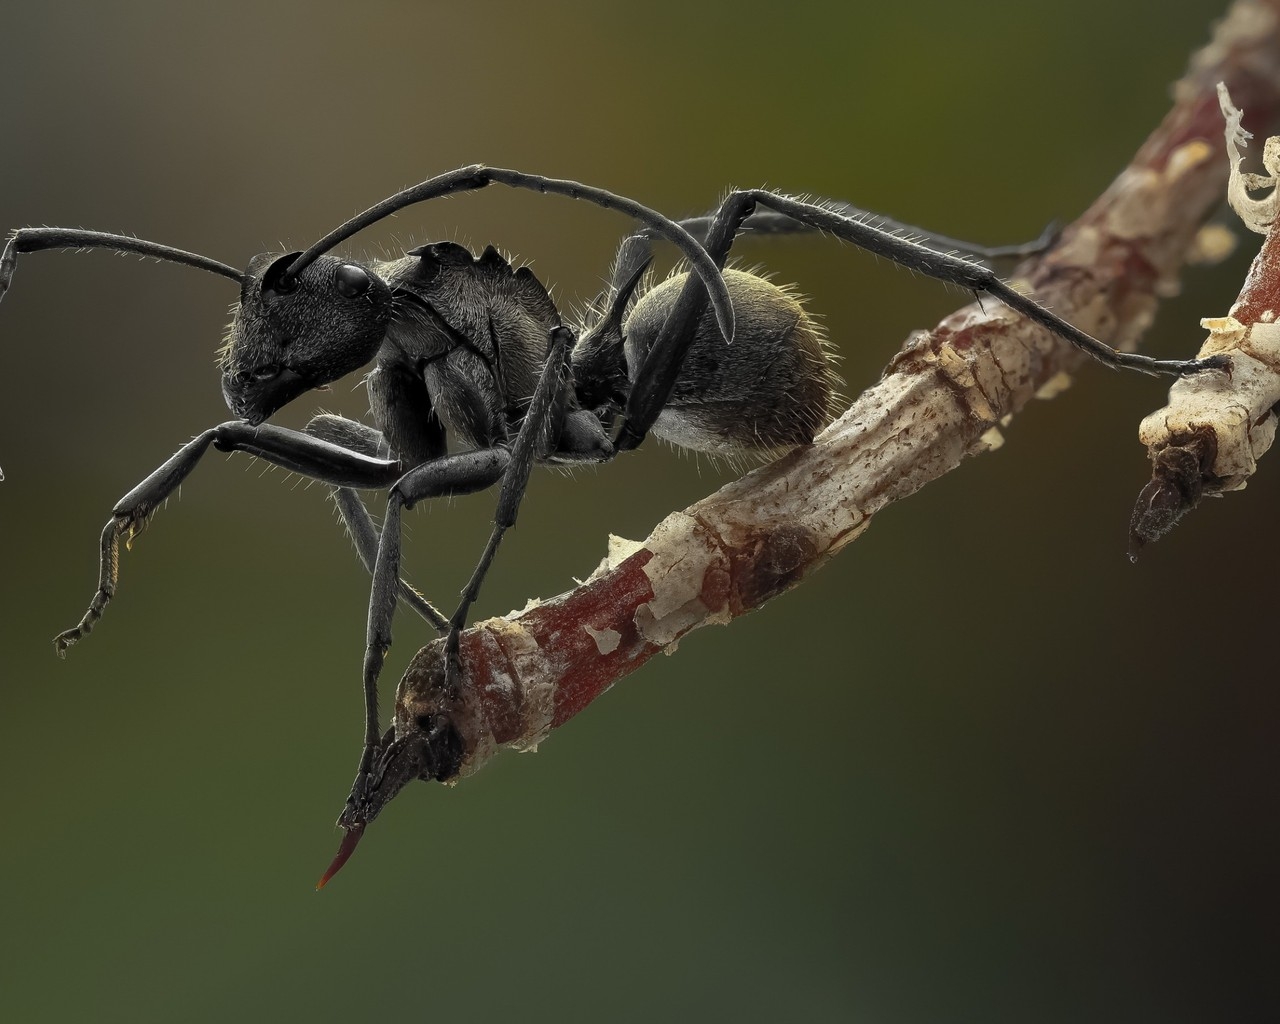 Ant Macro Photography for 1280 x 1024 resolution